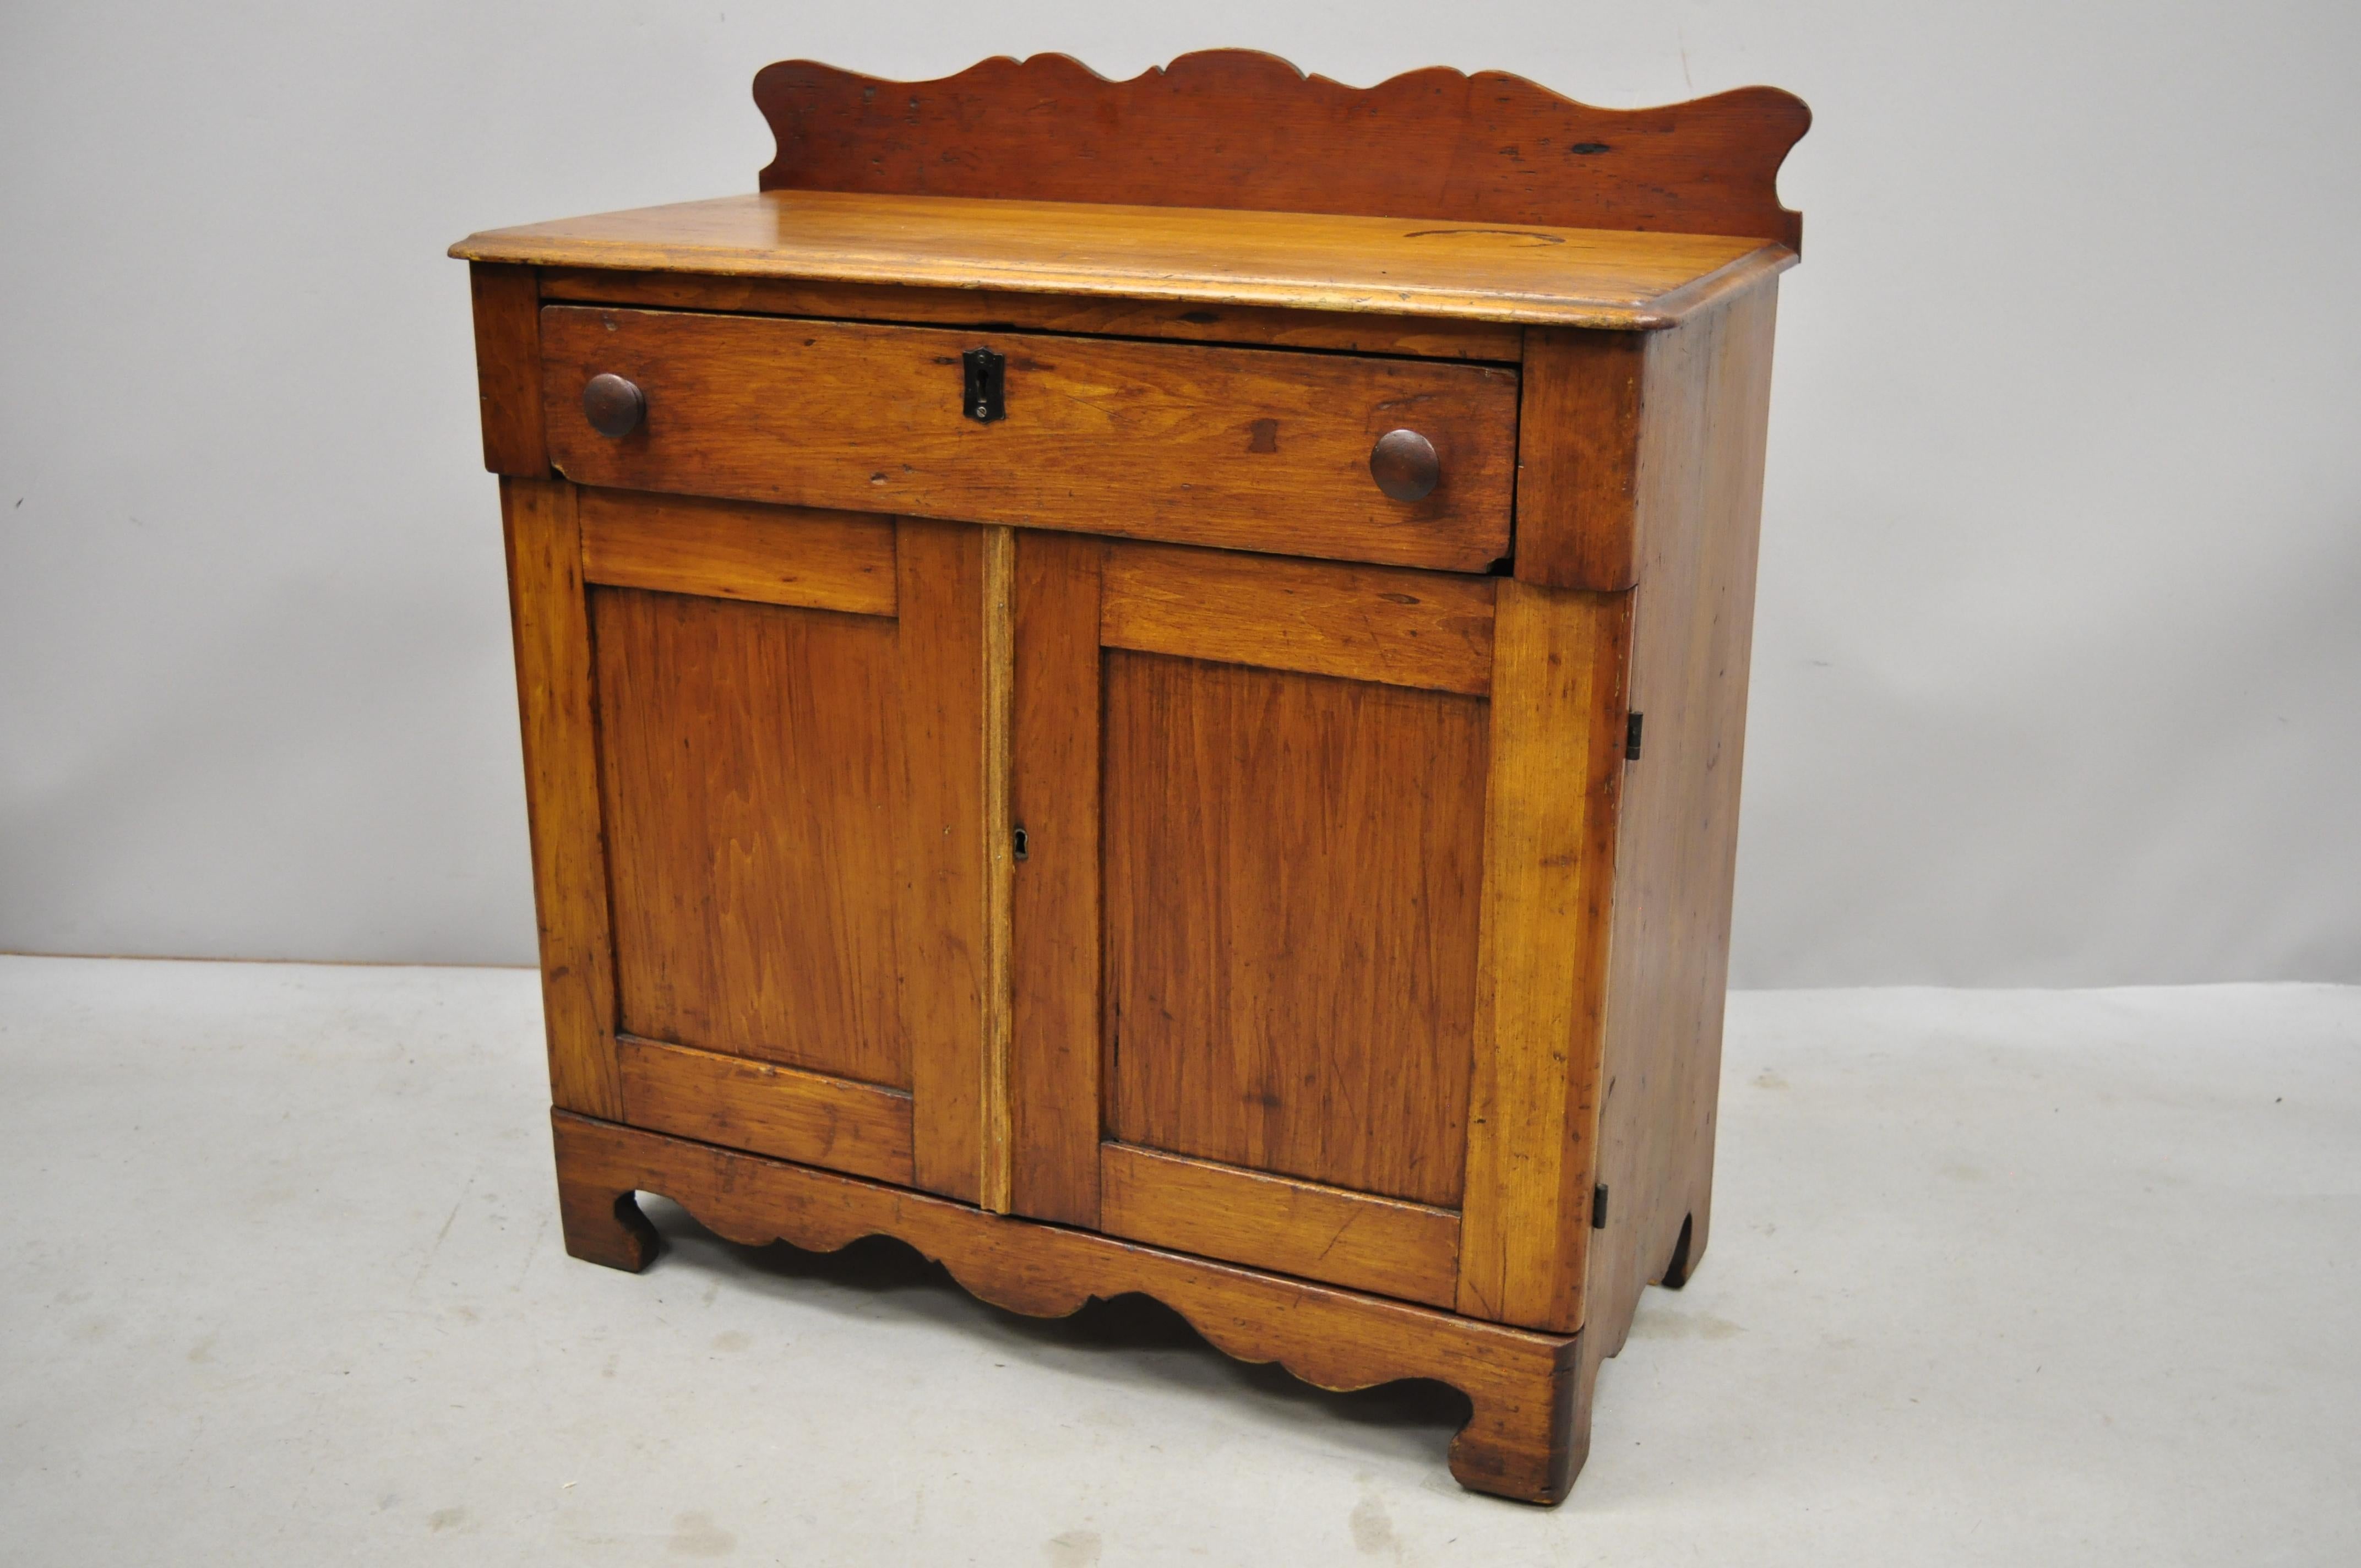 Antique 19th century American Primitive chestnut washstand nightstand work table. Item features blue painted interior, carved backsplash, solid wood construction, beautiful wood grain, 2 swing doors, 1 drawer, very nice antique item, circa mid-19th